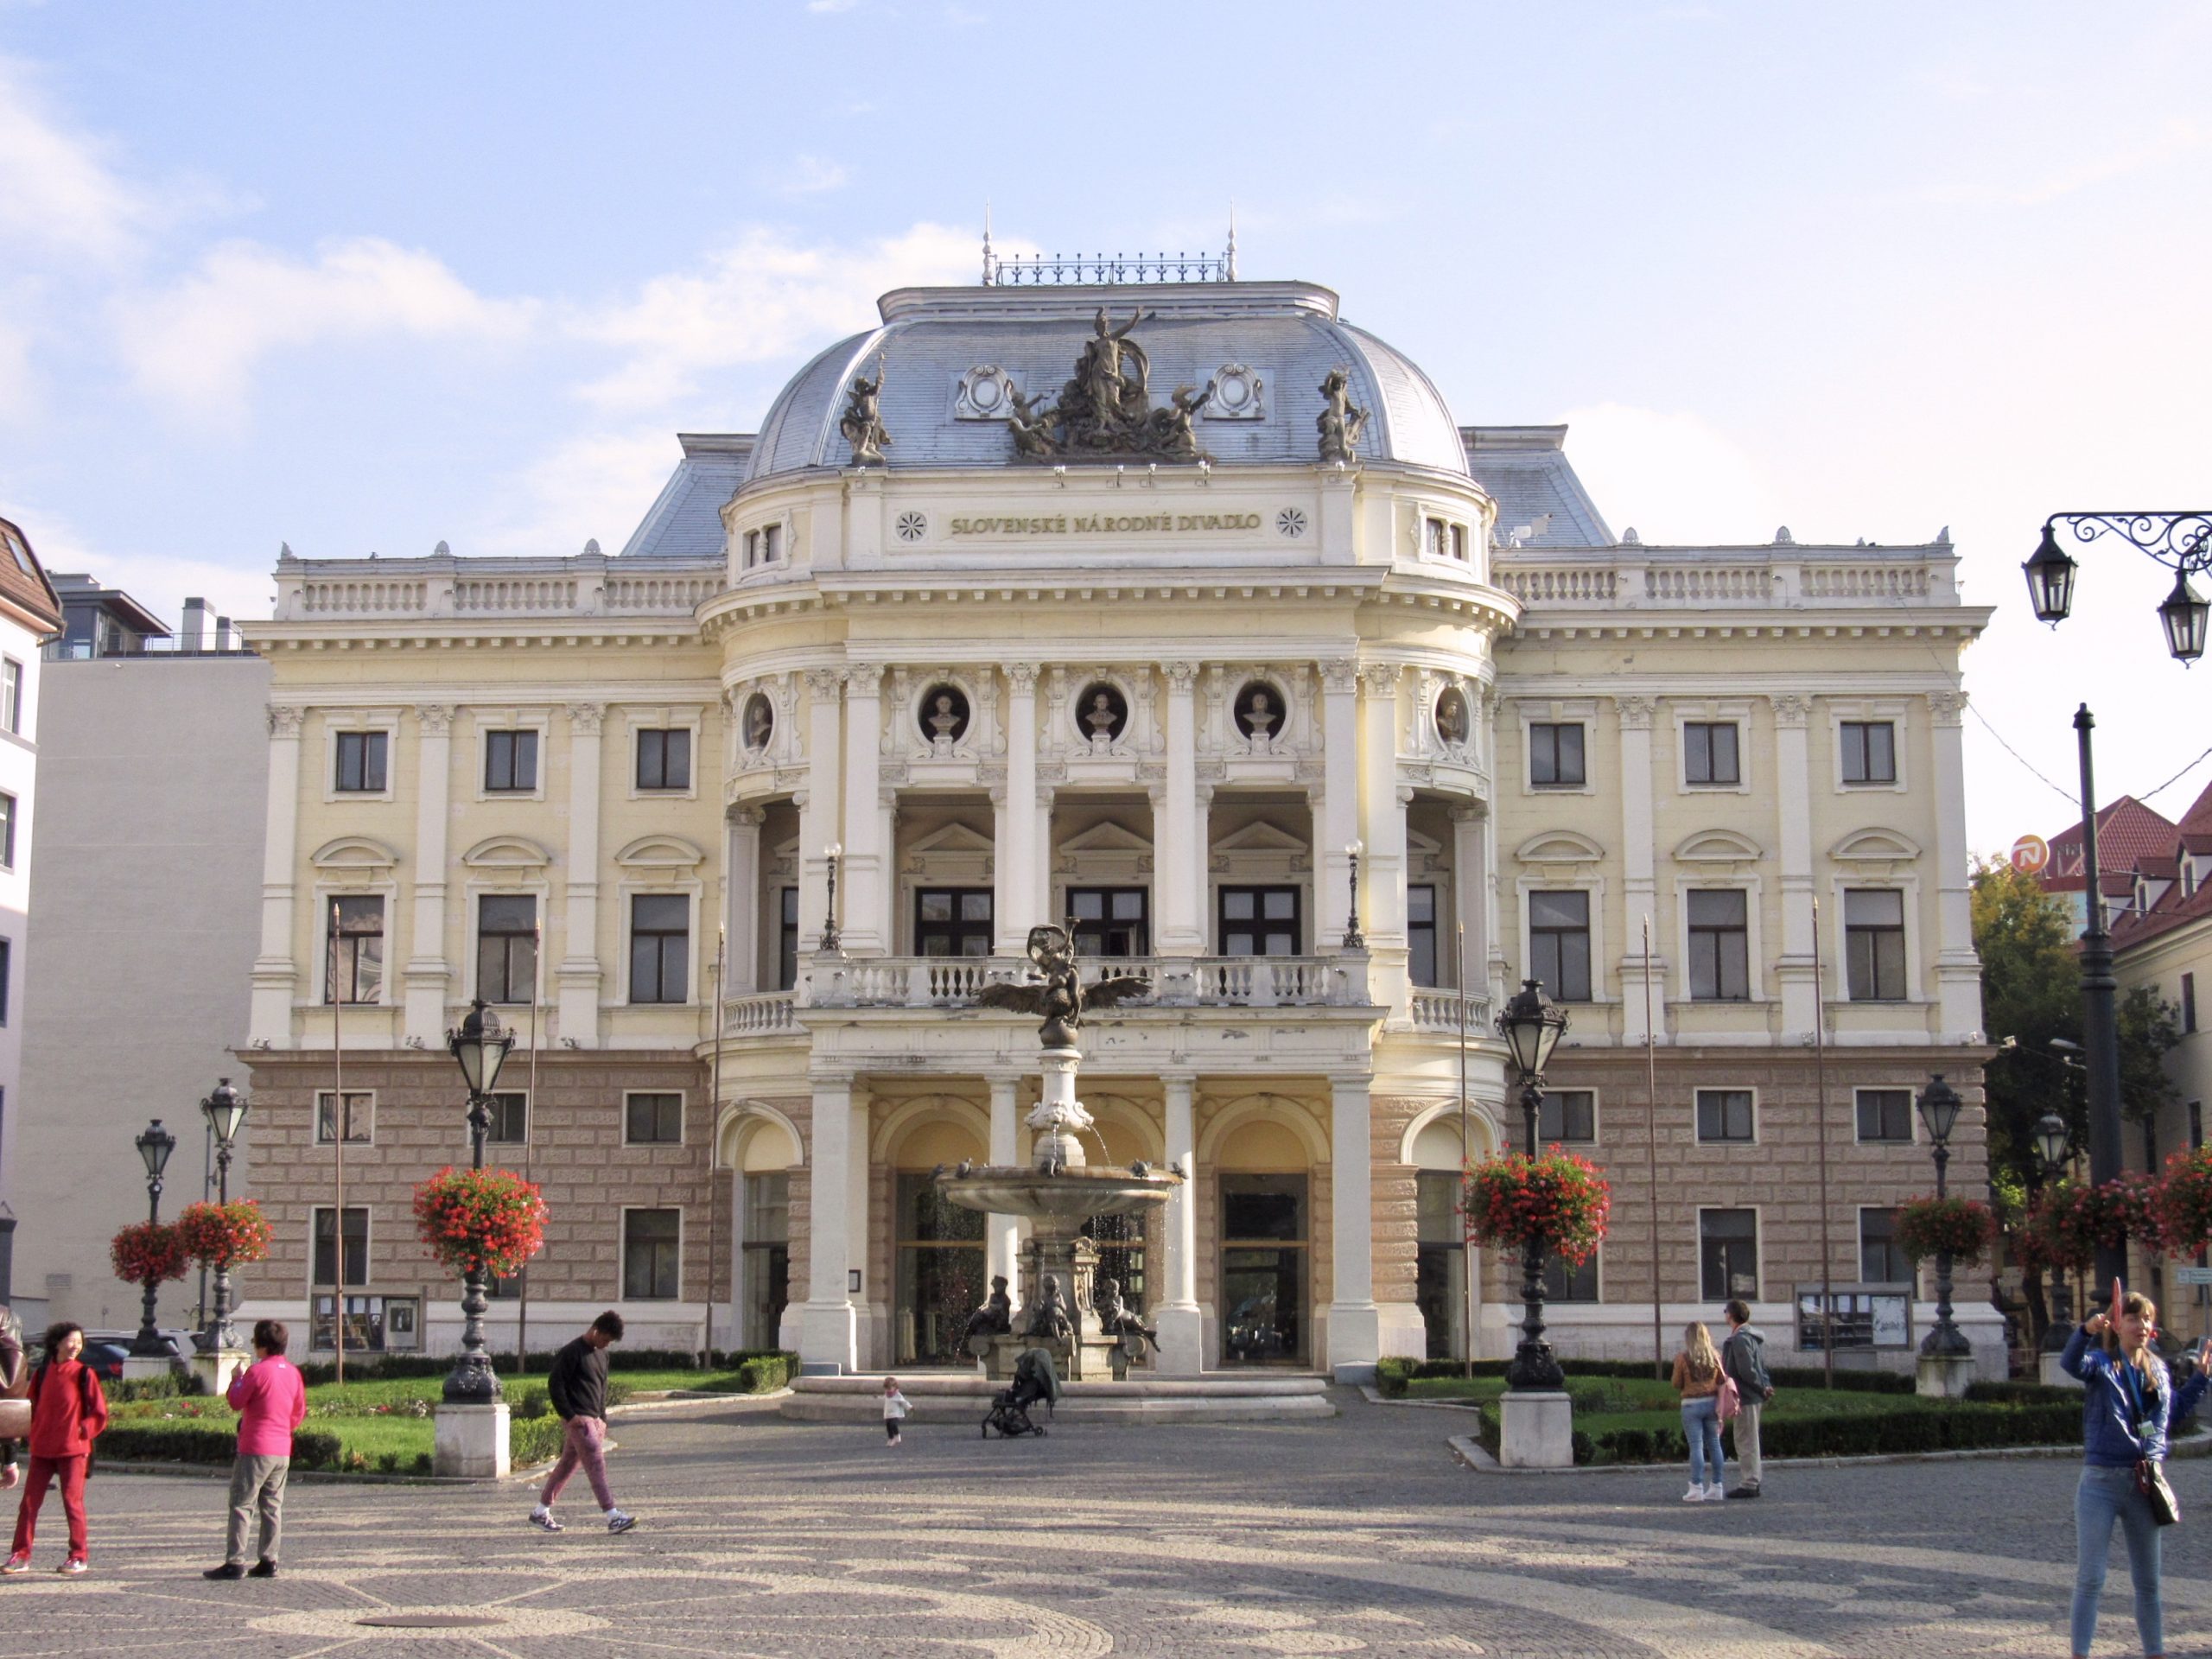 Slovak National Theatre on a walking tour of Bratislava on Melodies of the Danube river cruise